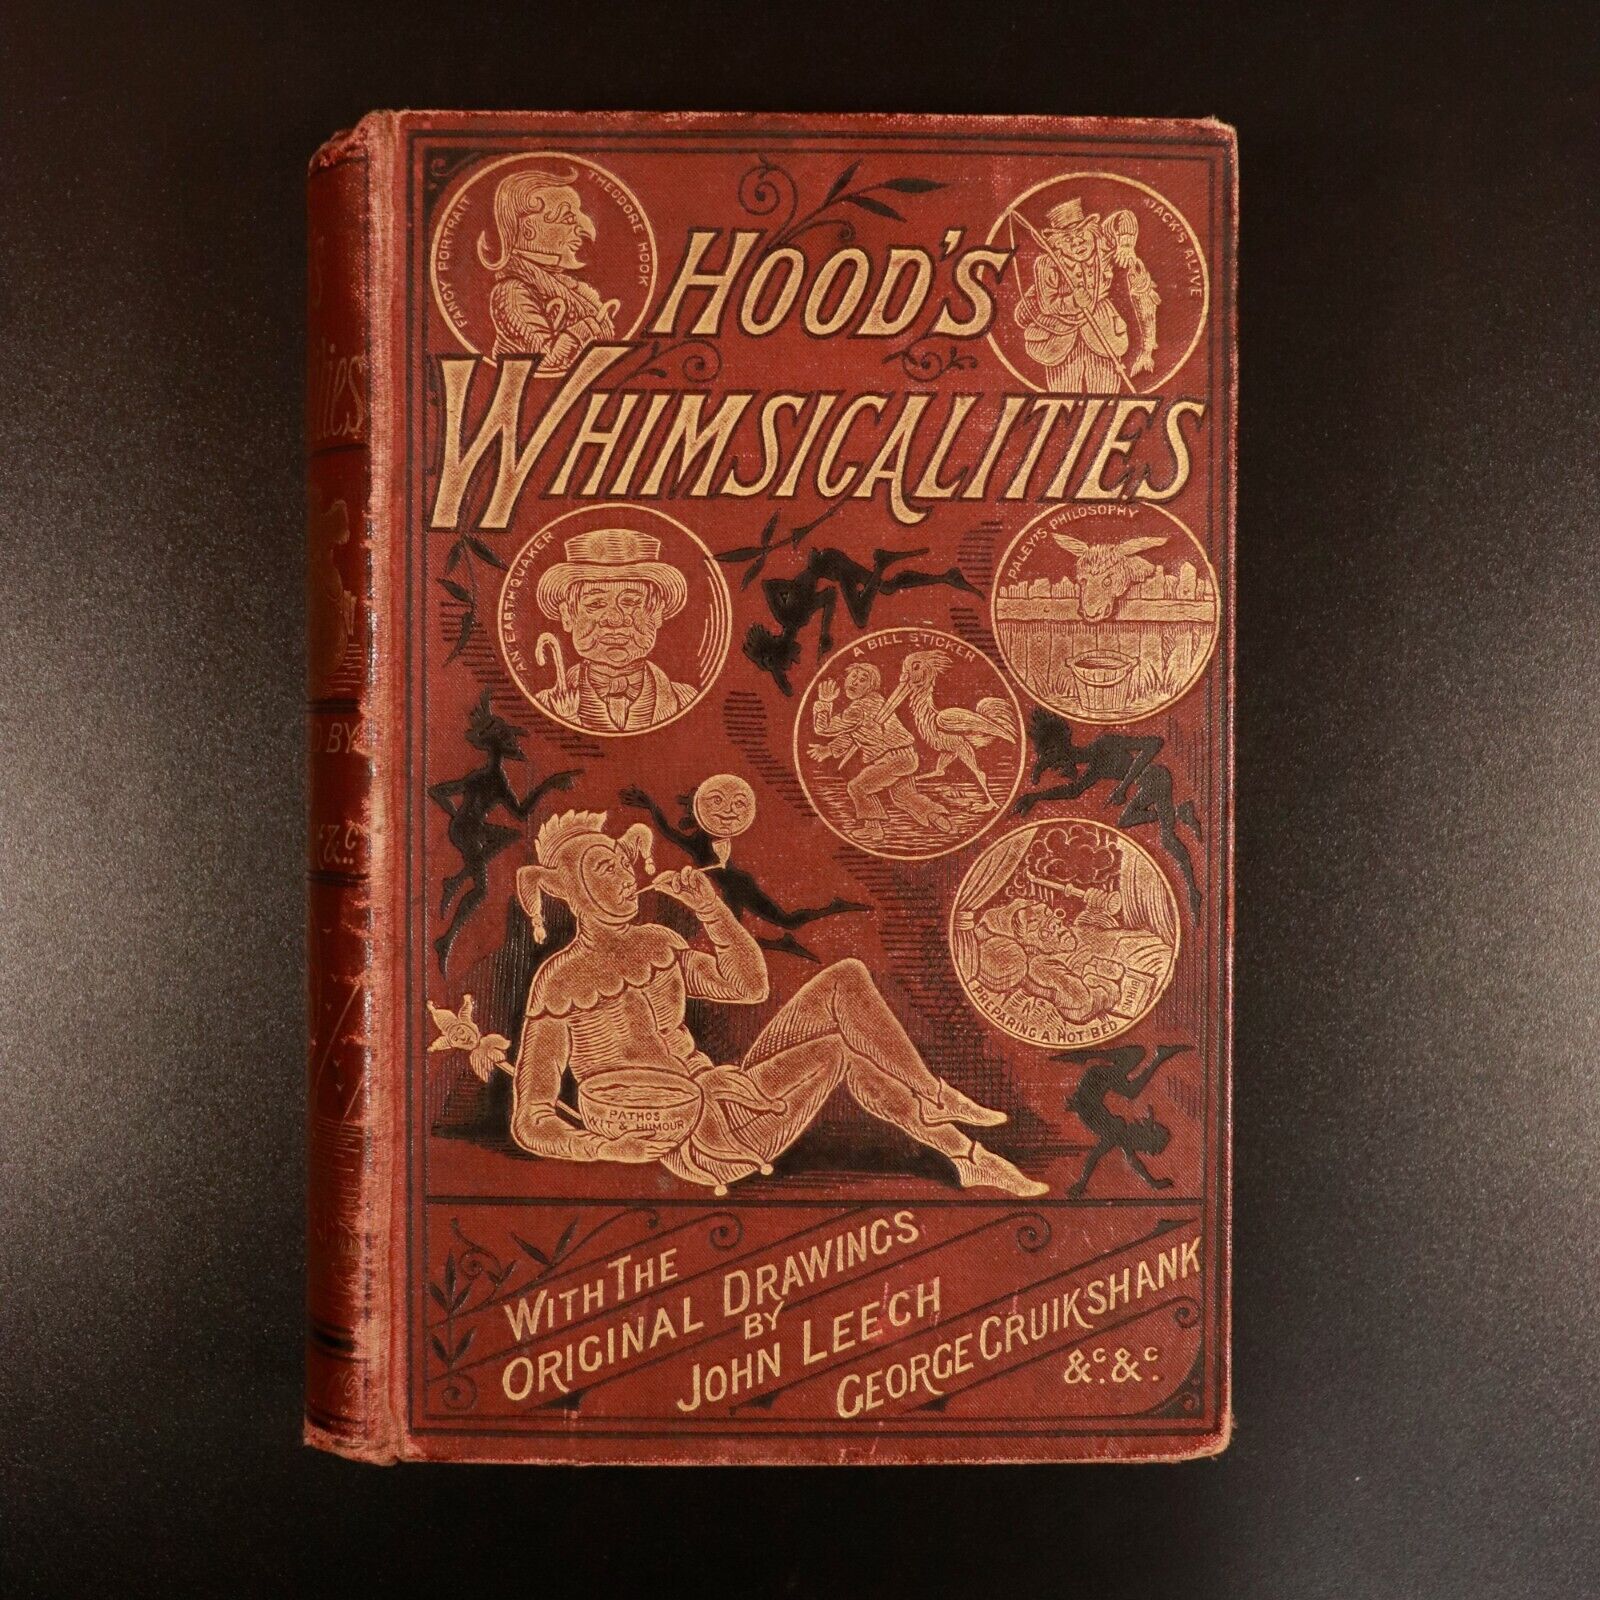 c1880 Whimsicalities by Thomas Hood Antique Illustrated British Literature Book